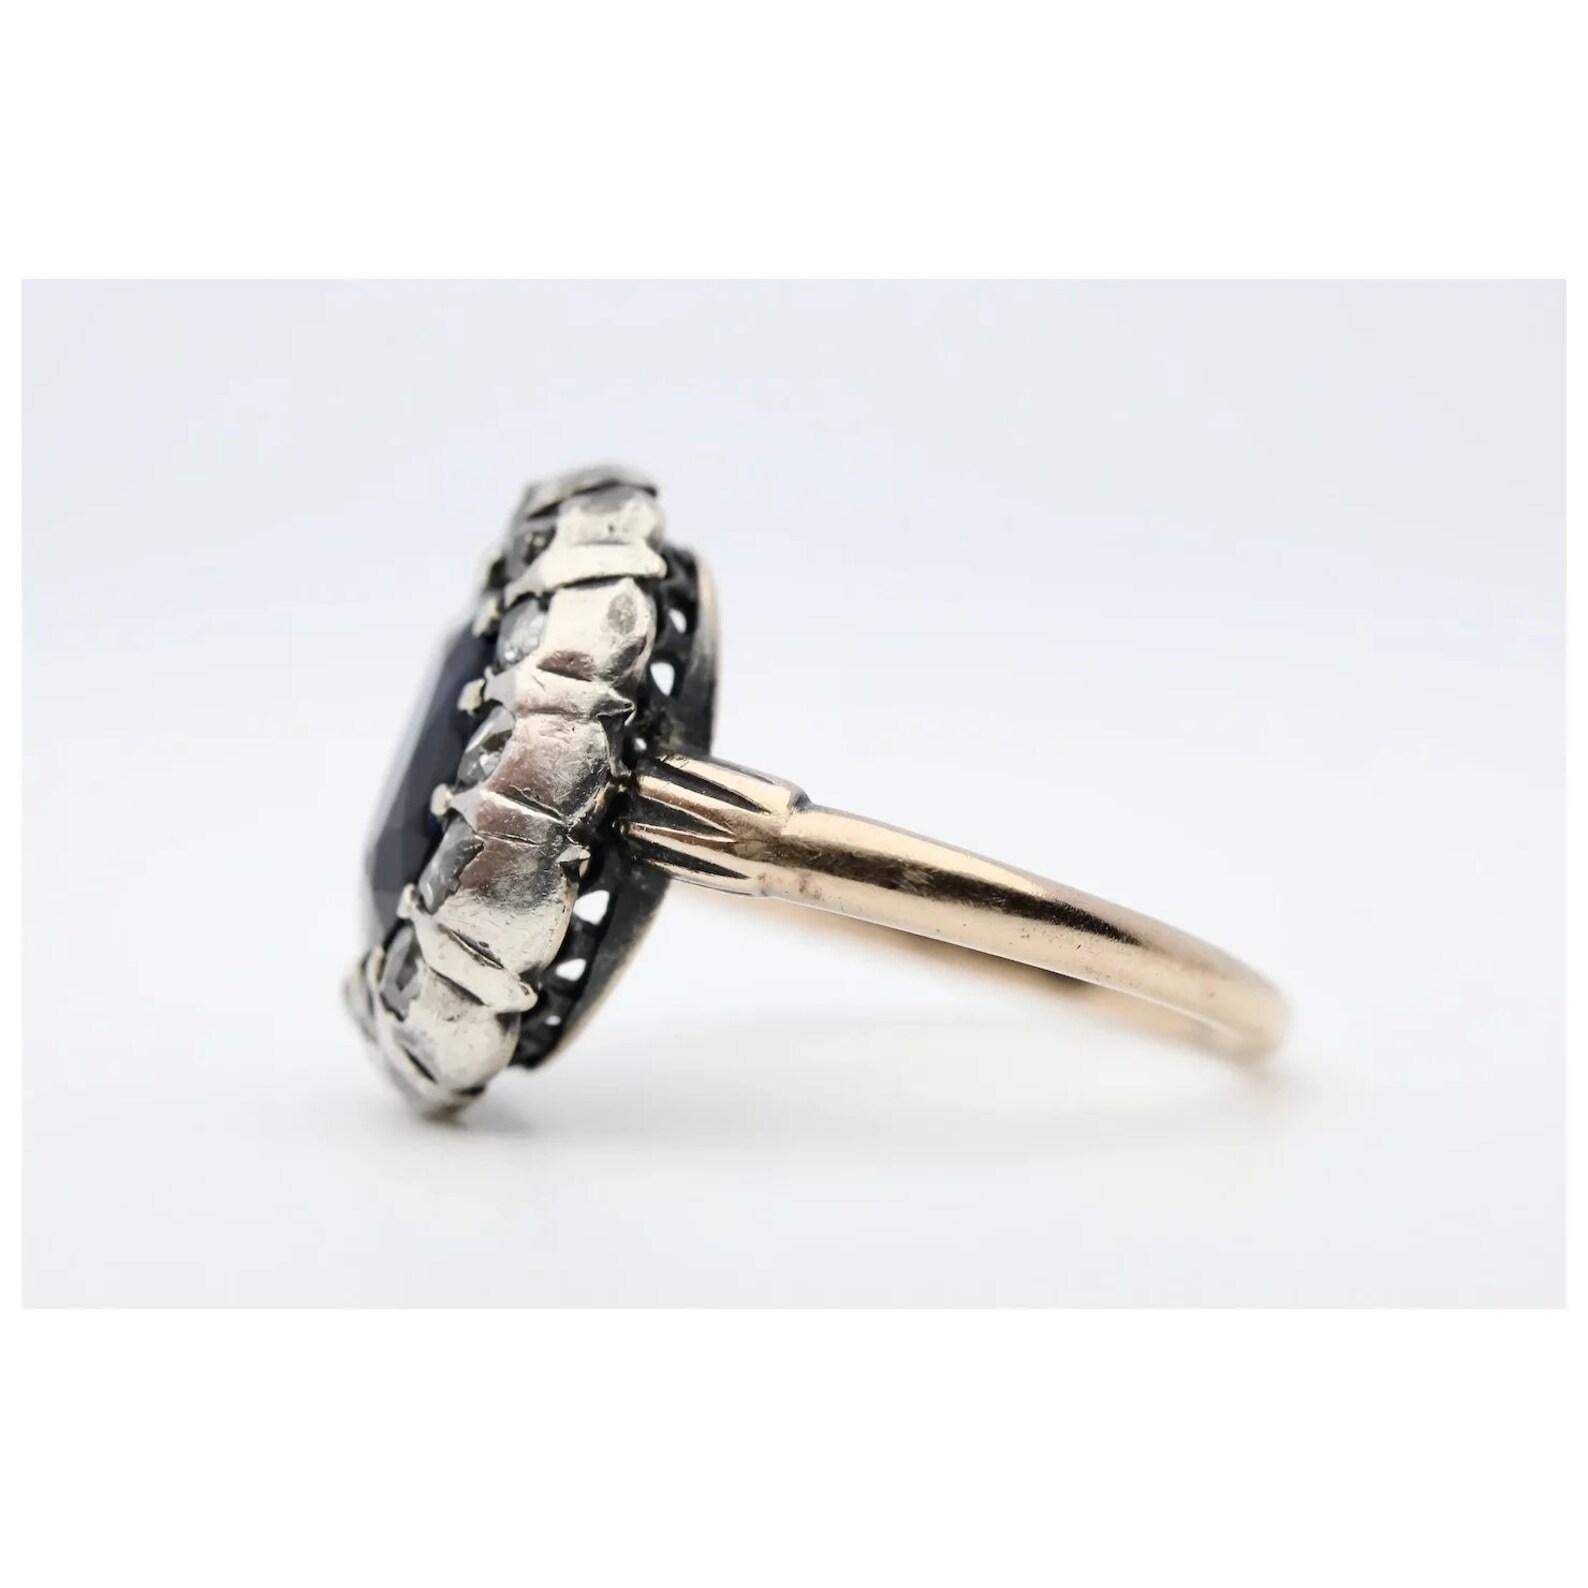 An original early 19th century Georgian period sapphire, and rose cut diamond halo style ring in silver and rose gold. Centered by a 2.50 carat natural vivid blue sapphire of beautiful VS clarity. Encircling the sapphire are a dozen sparkling rose